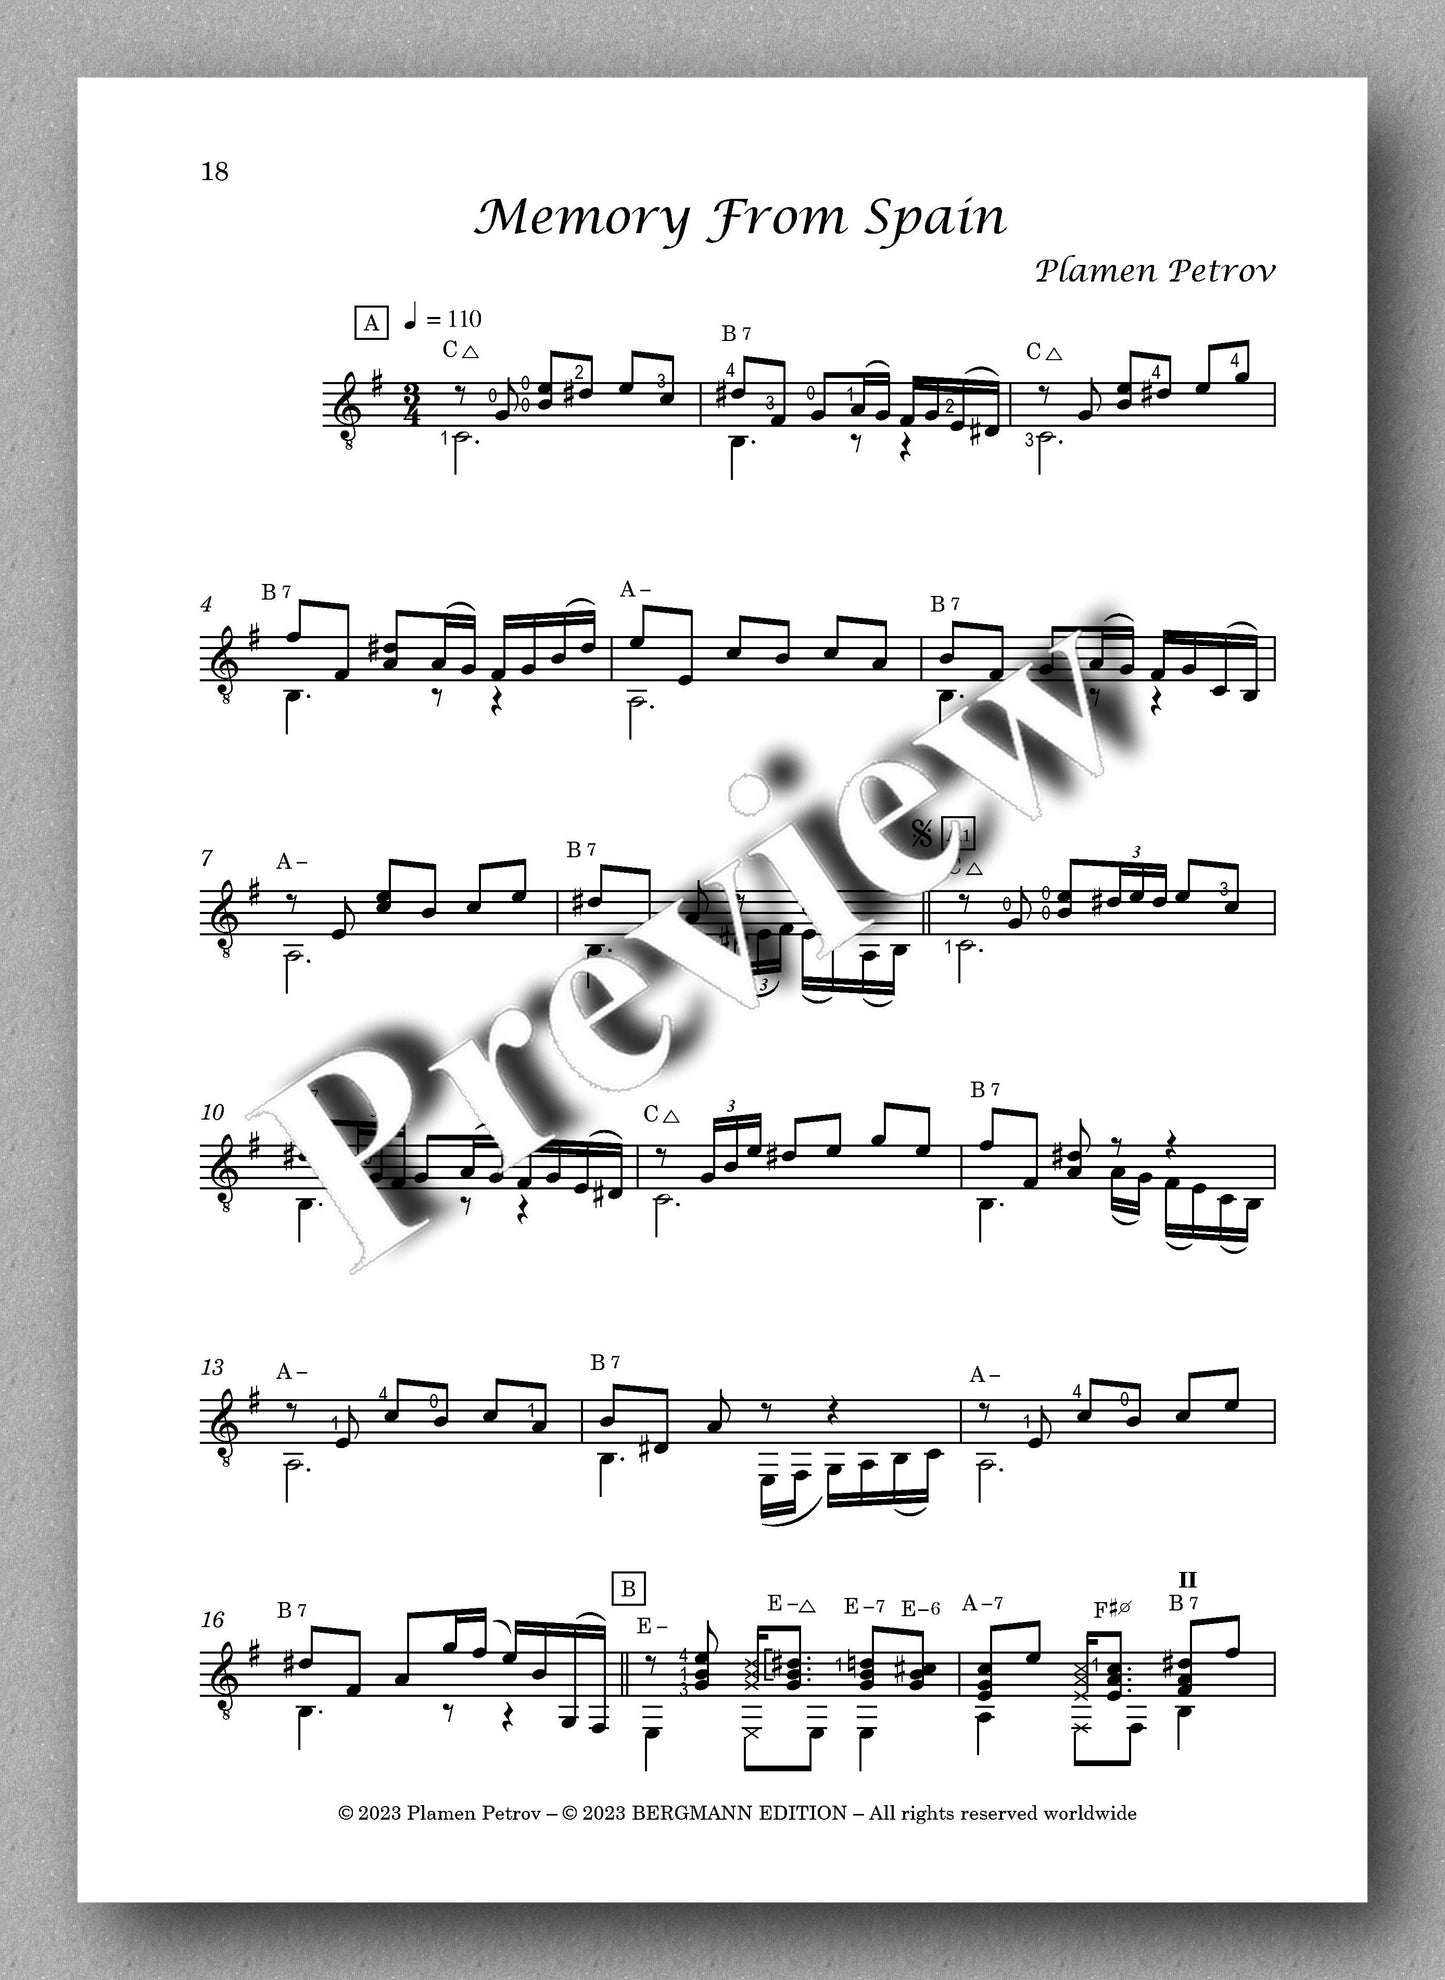 Revelations by Plamen Petrov - preview of the Music score 4